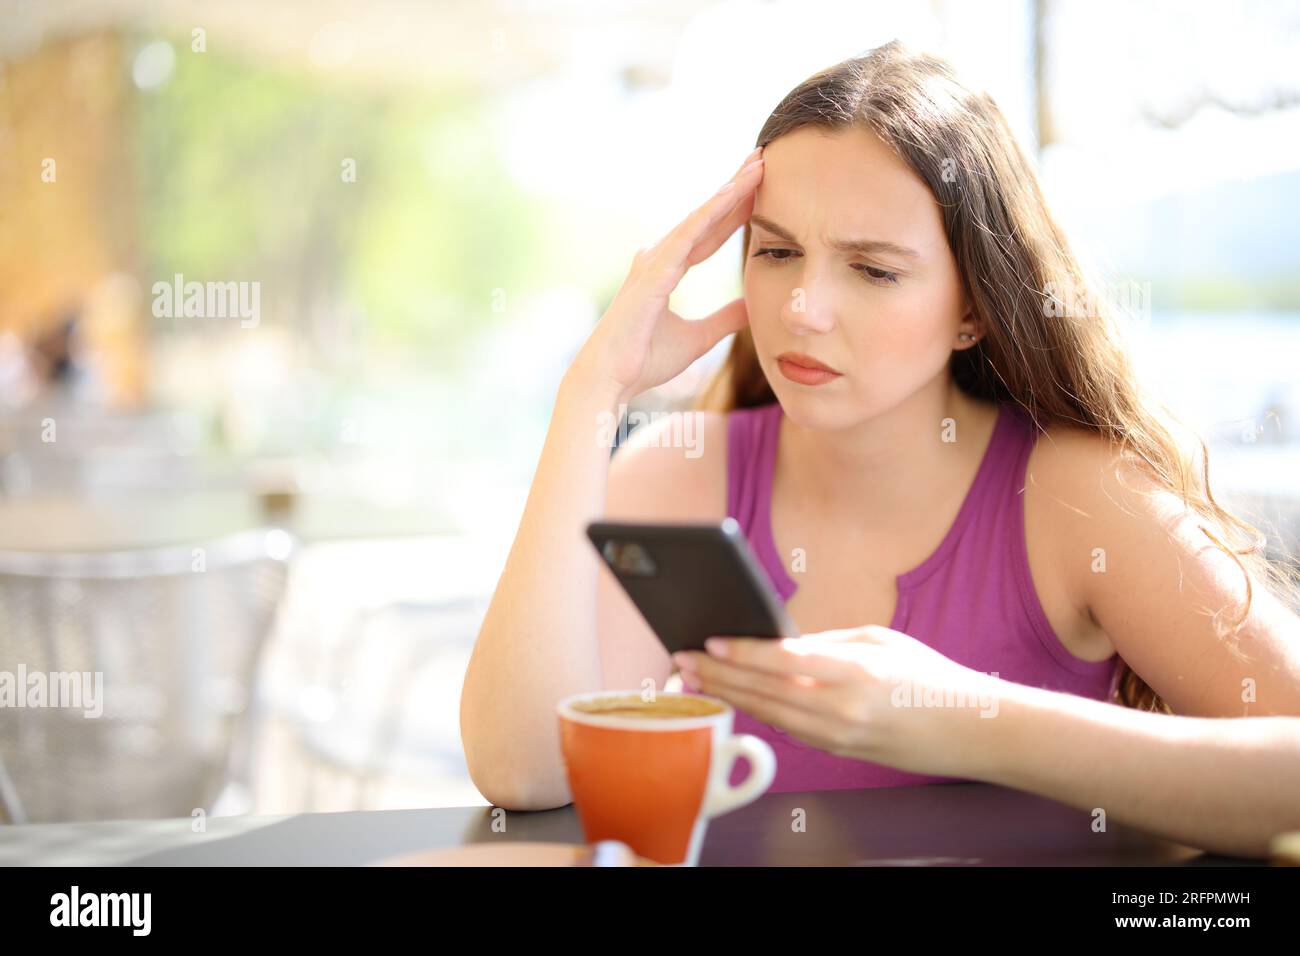 Worried woman checking phone sitting in a bar terrace Stock Photo